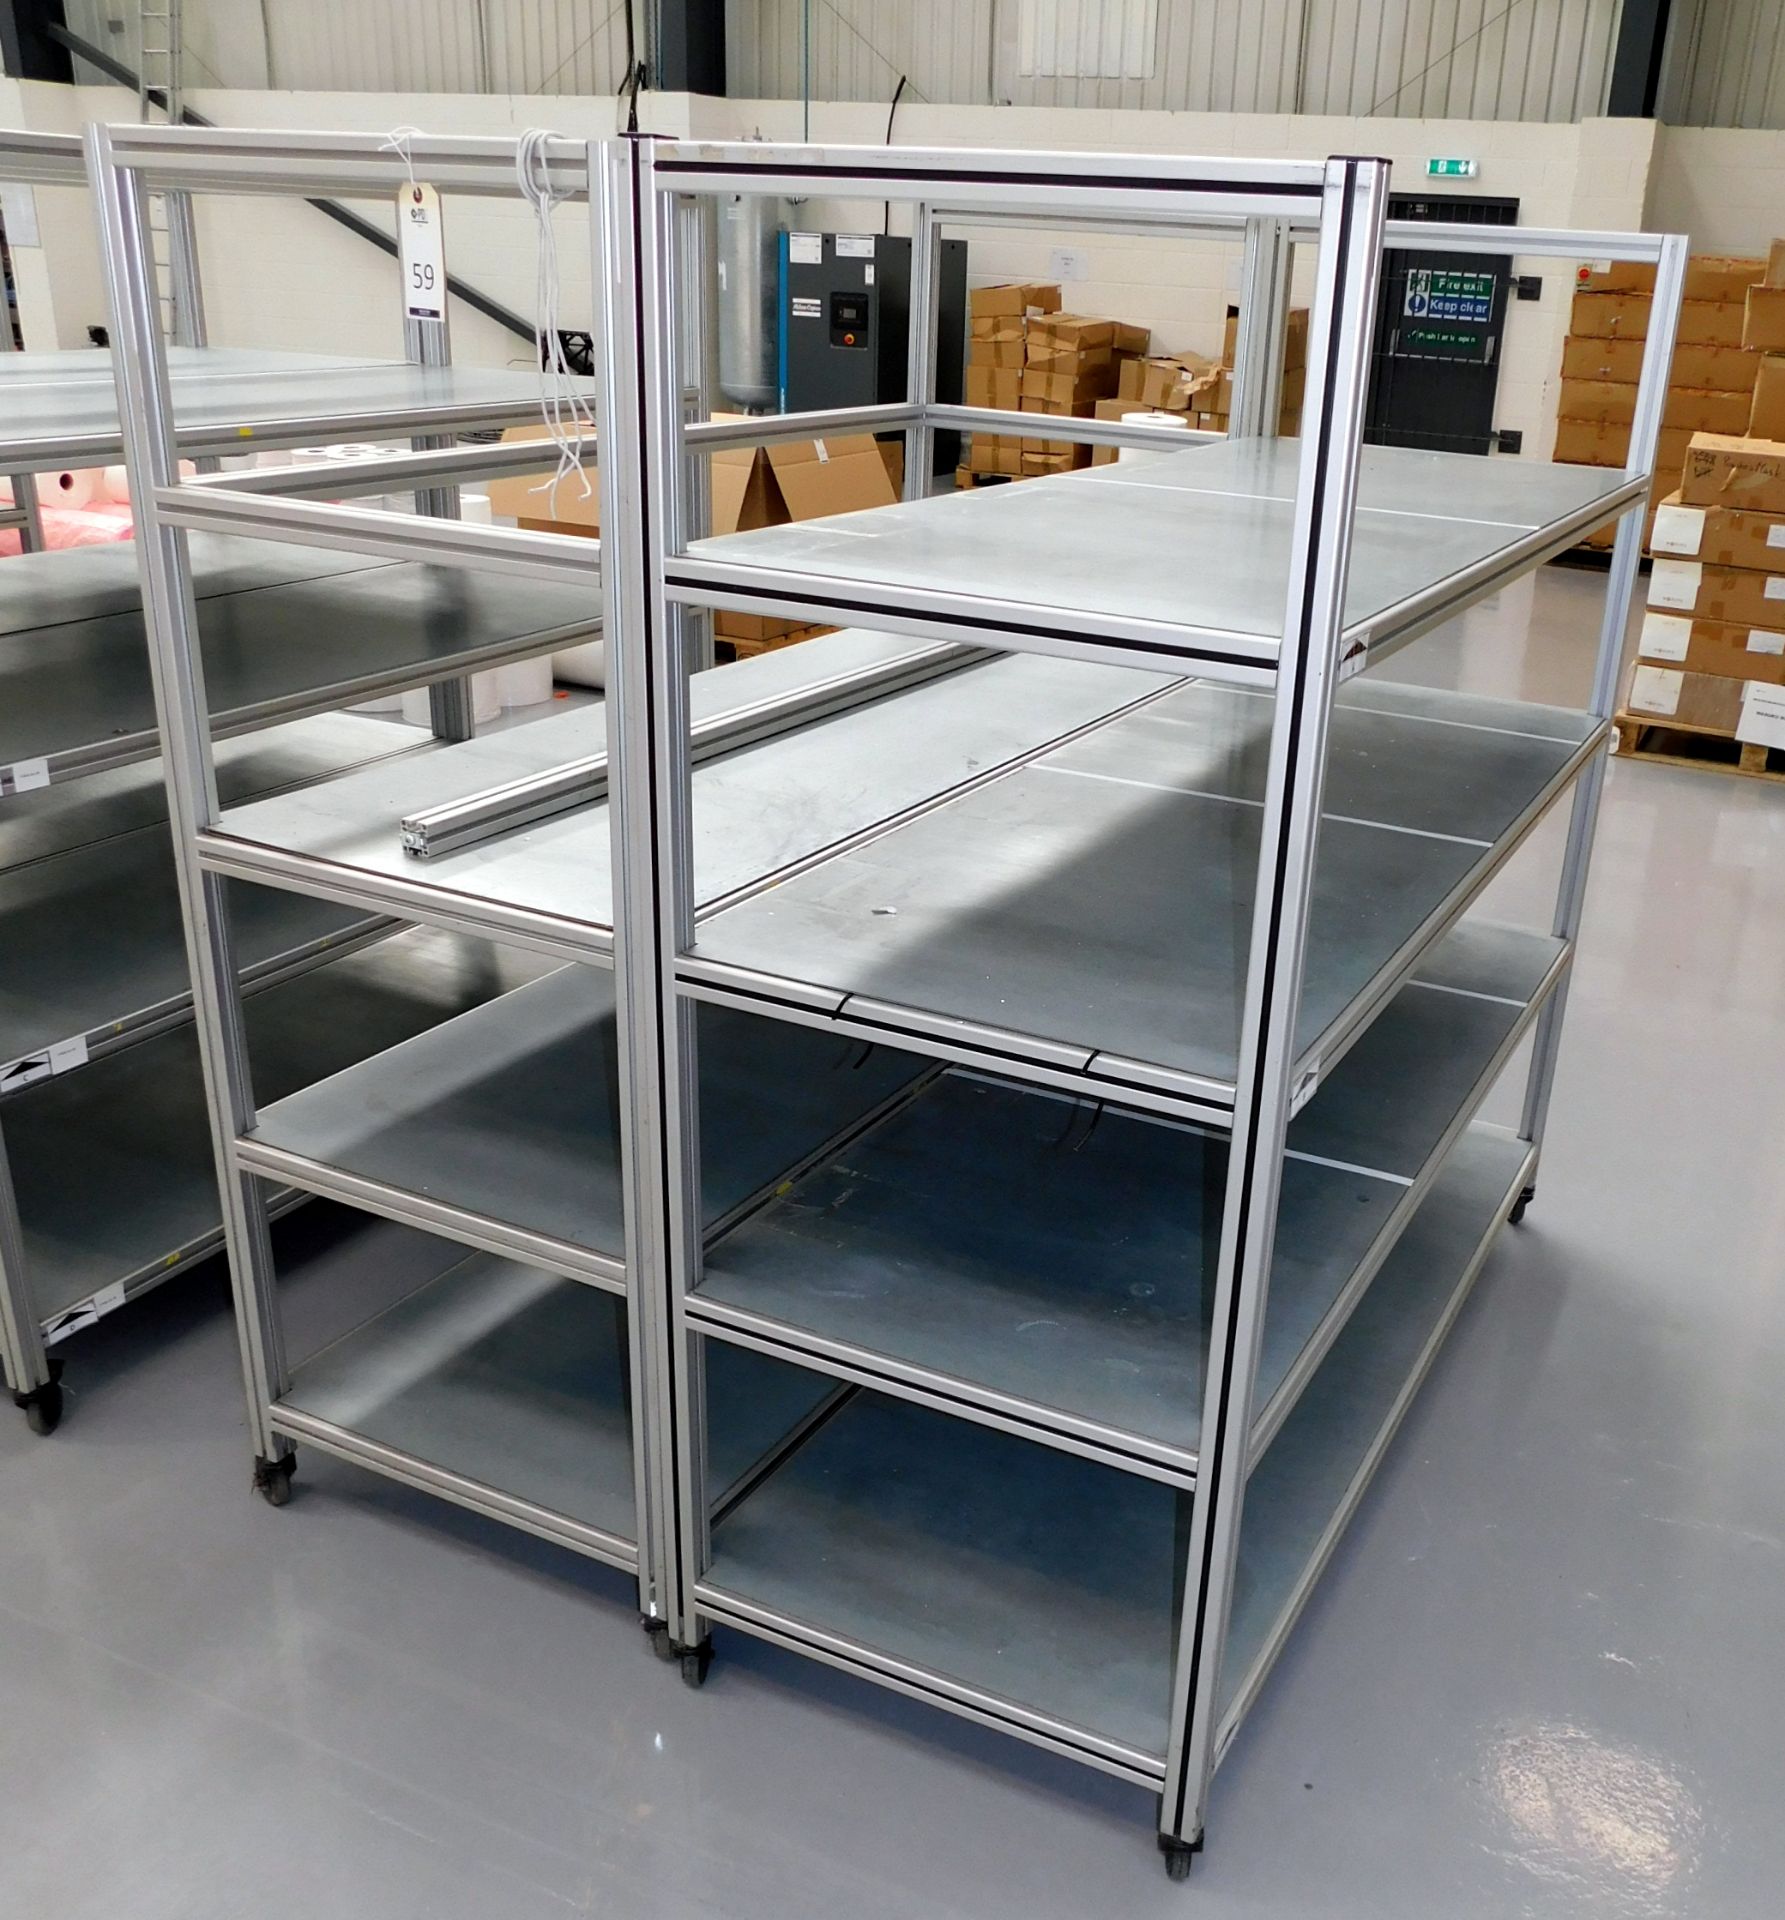 2 Fabricated 4-Tier Trollies (Each Approx. 176cm (W) x 67cm (D) x 170cm (H)) - Image 2 of 2